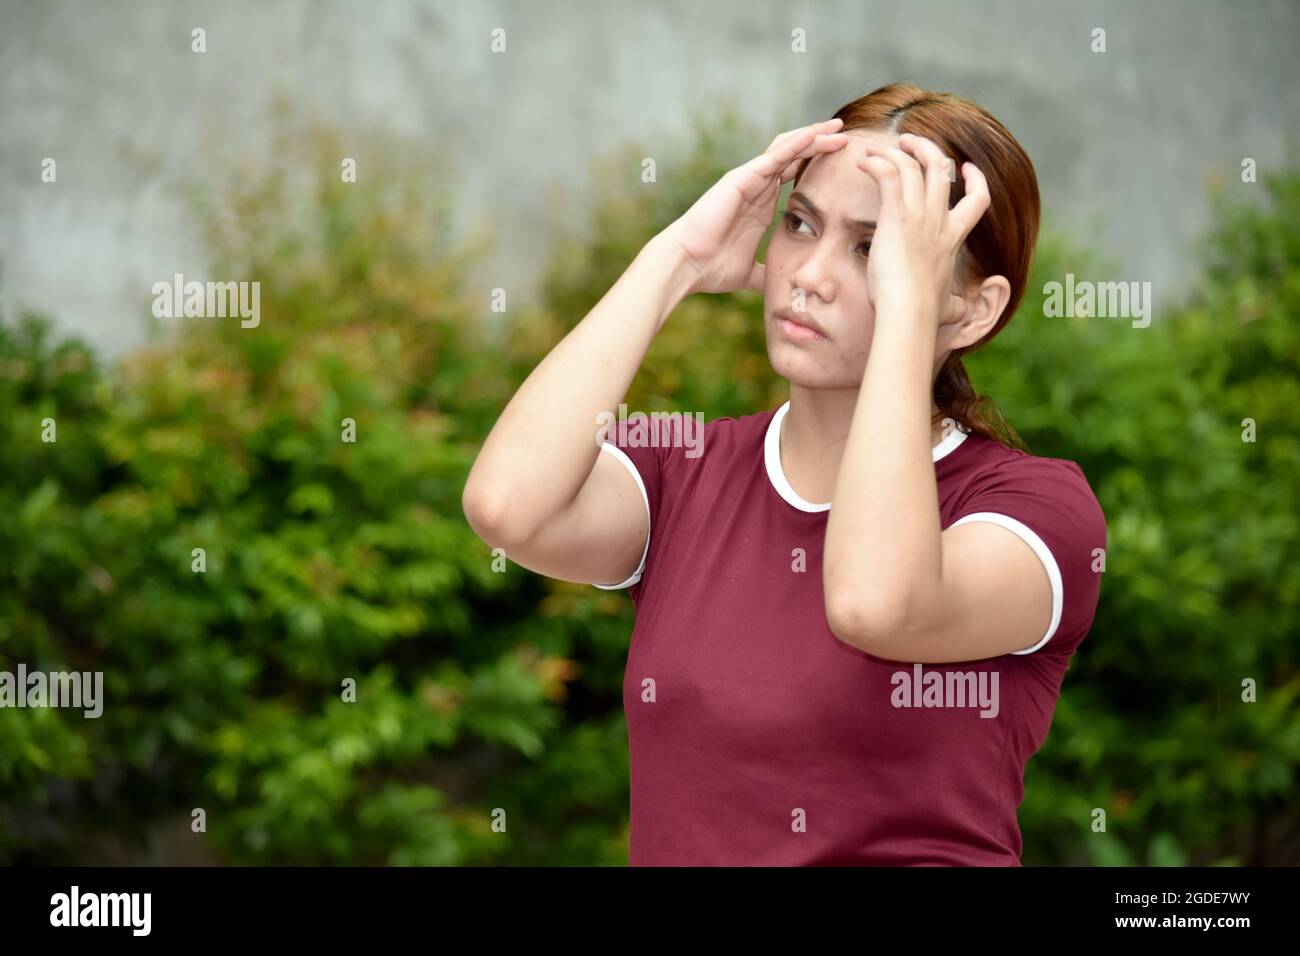 An Adult Female And Worry Stock Photo